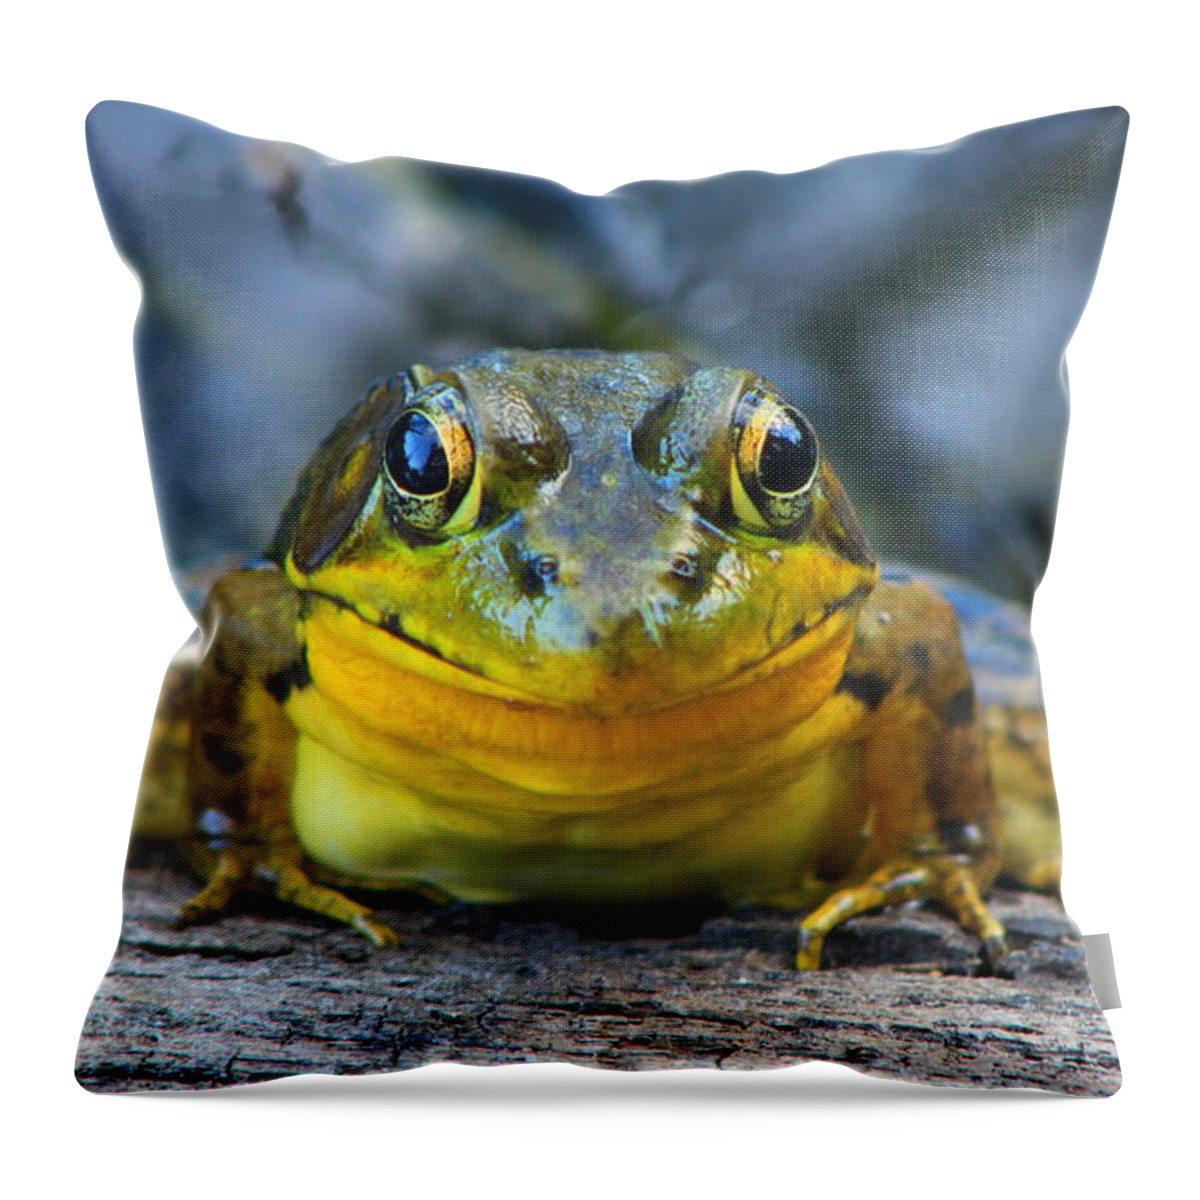 Wildlife Throw Pillow featuring the photograph Green Frog by John Burk